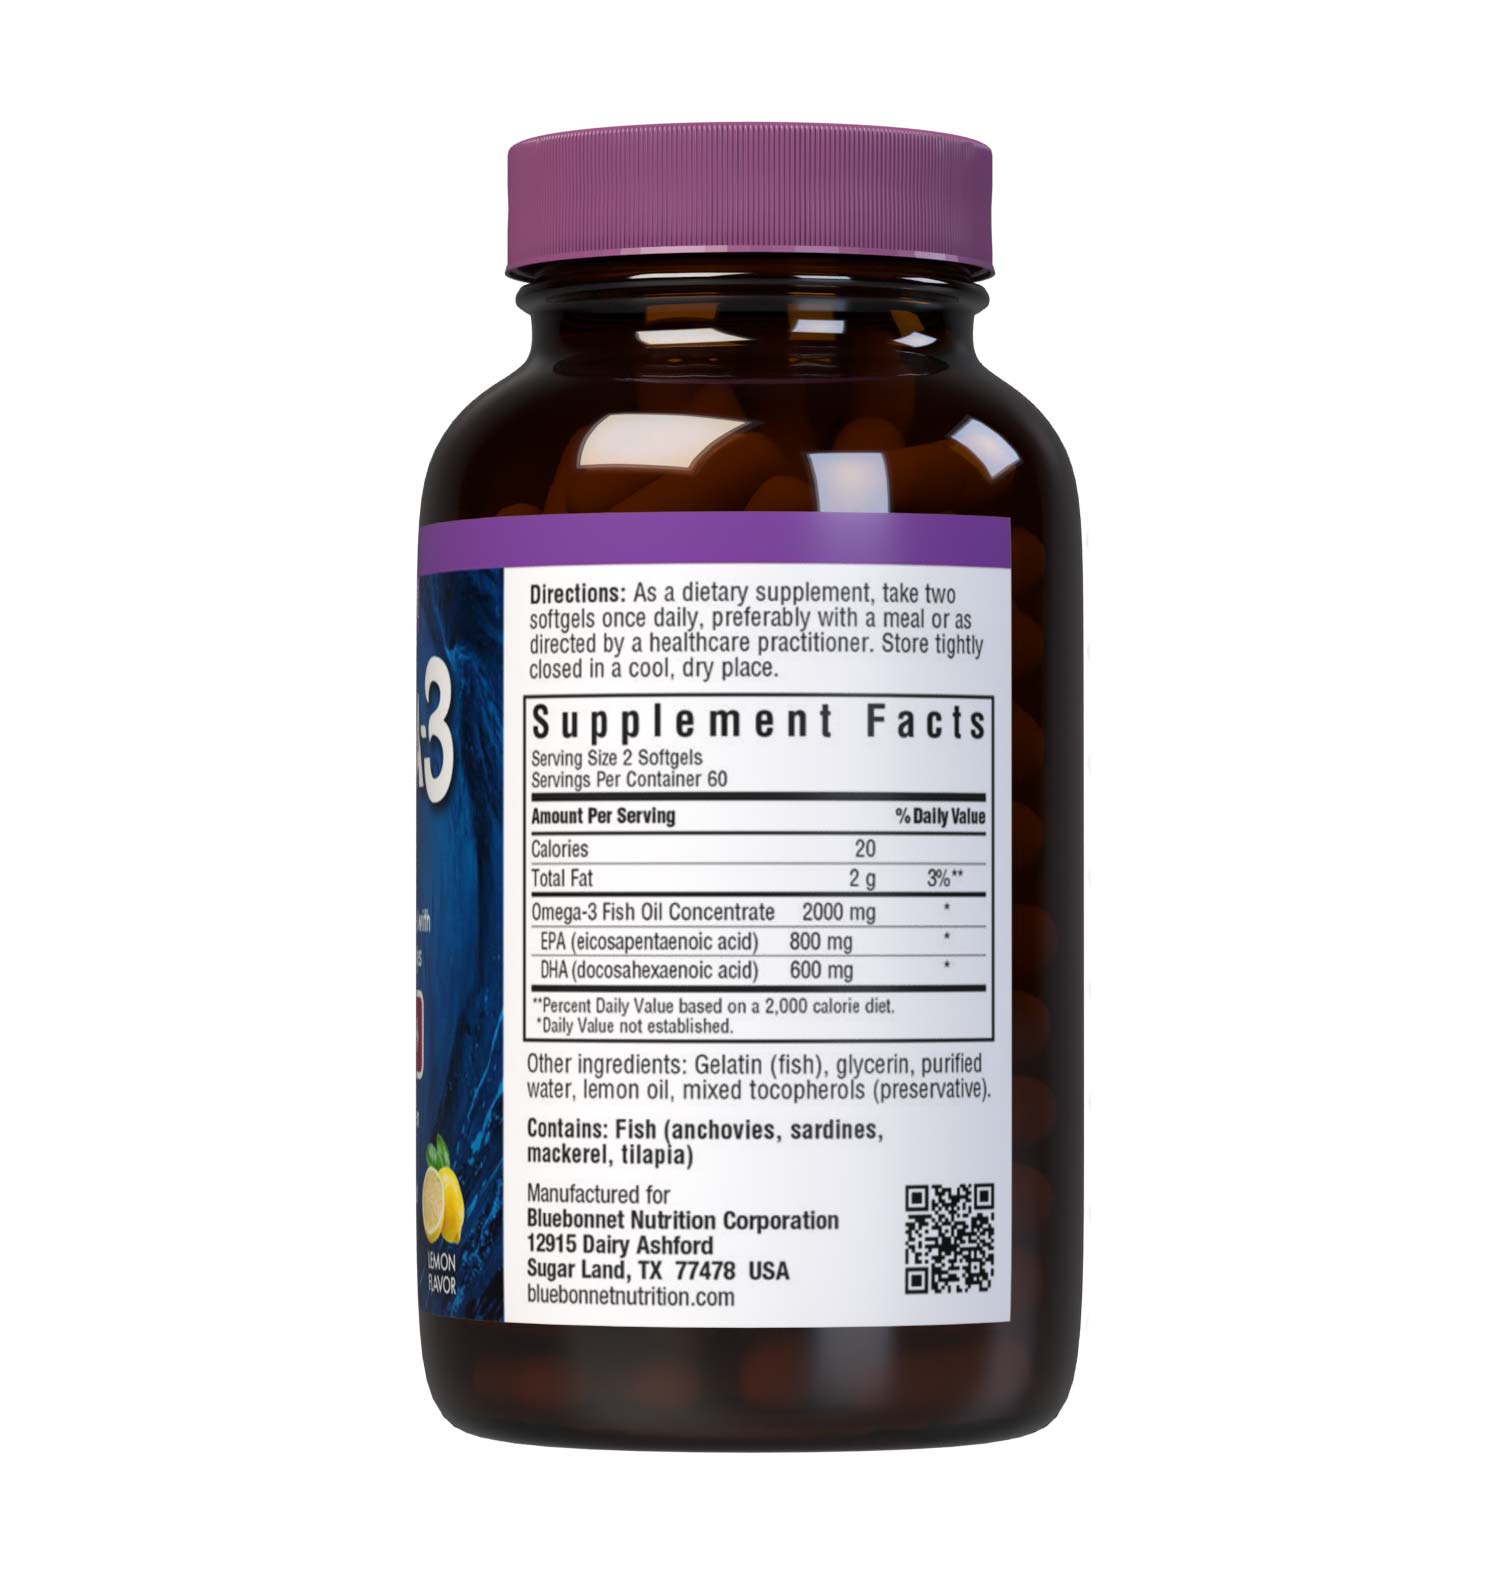 Bluebonnet’s Omega-3 Fish Oil Heart Health 120 Softgels are formulated with a specific ratio of EPA and DHA to help support heart function, blood flow, and blood pressure within the normal range by utilizing ultra-refined omega-3s from wild-caught fish. Supplement facts panel. #size_120 count